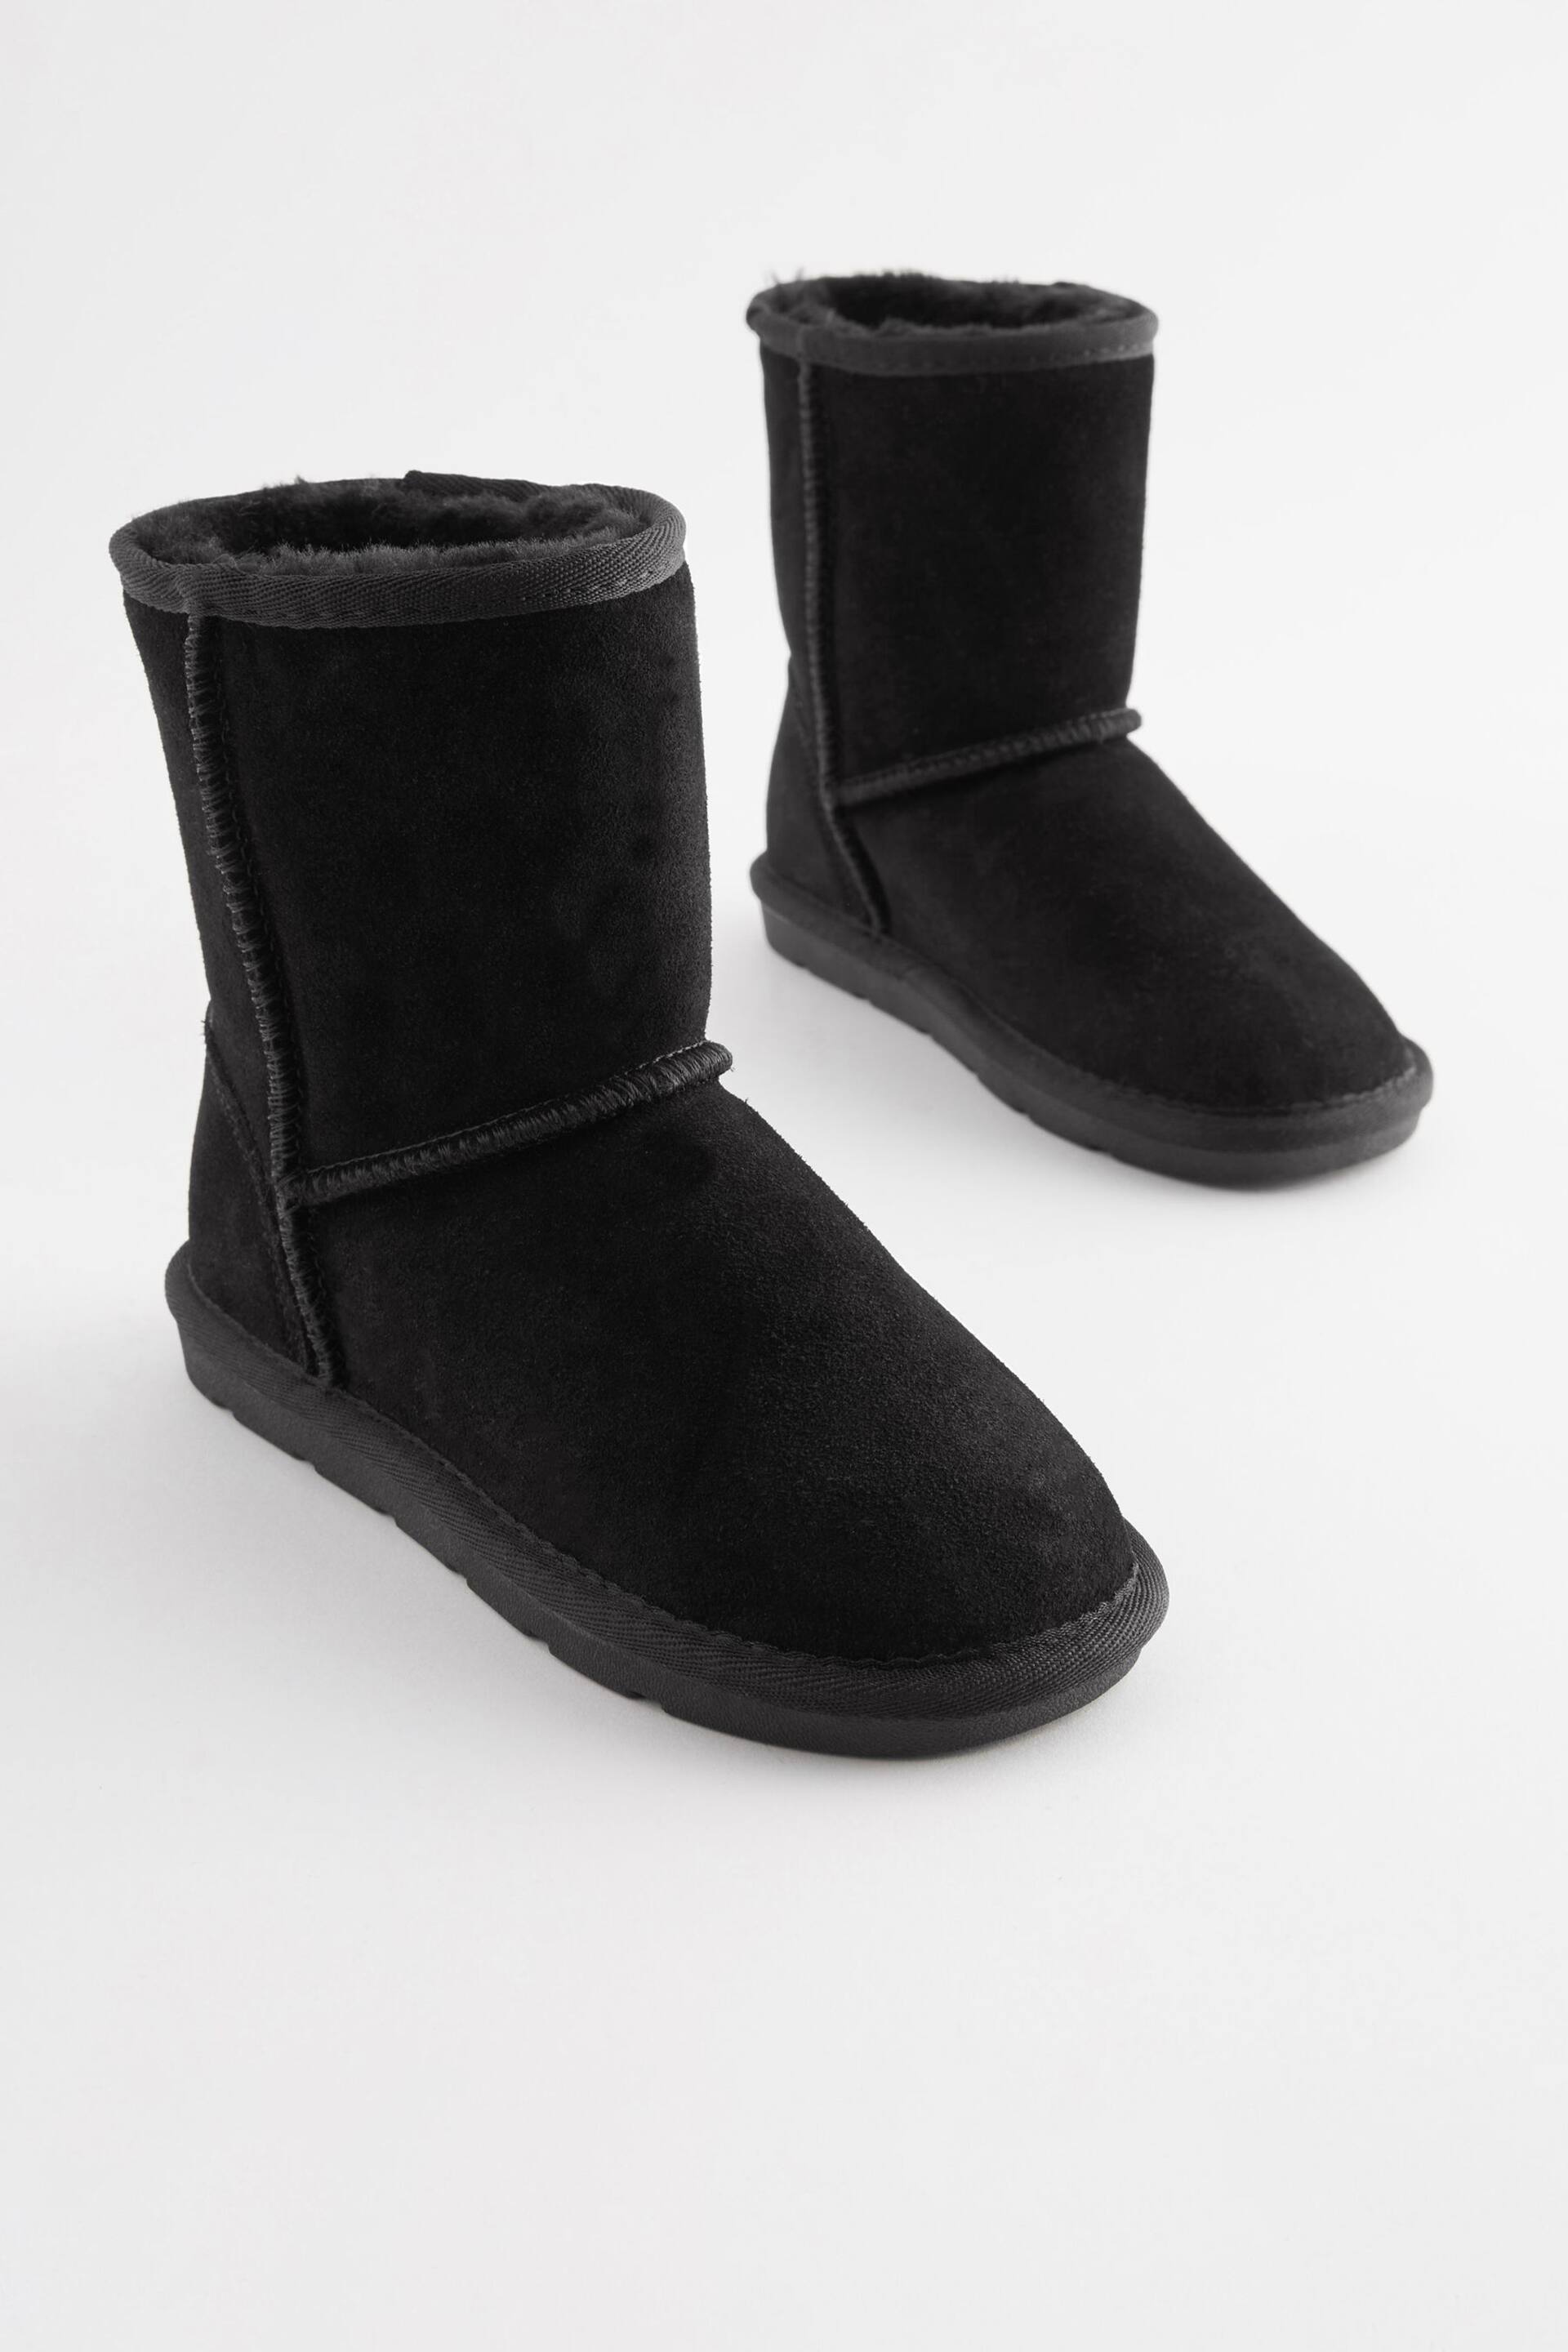 Black Tall Warm Lined Water Repellent Suede Pull-On Boots - Image 3 of 7